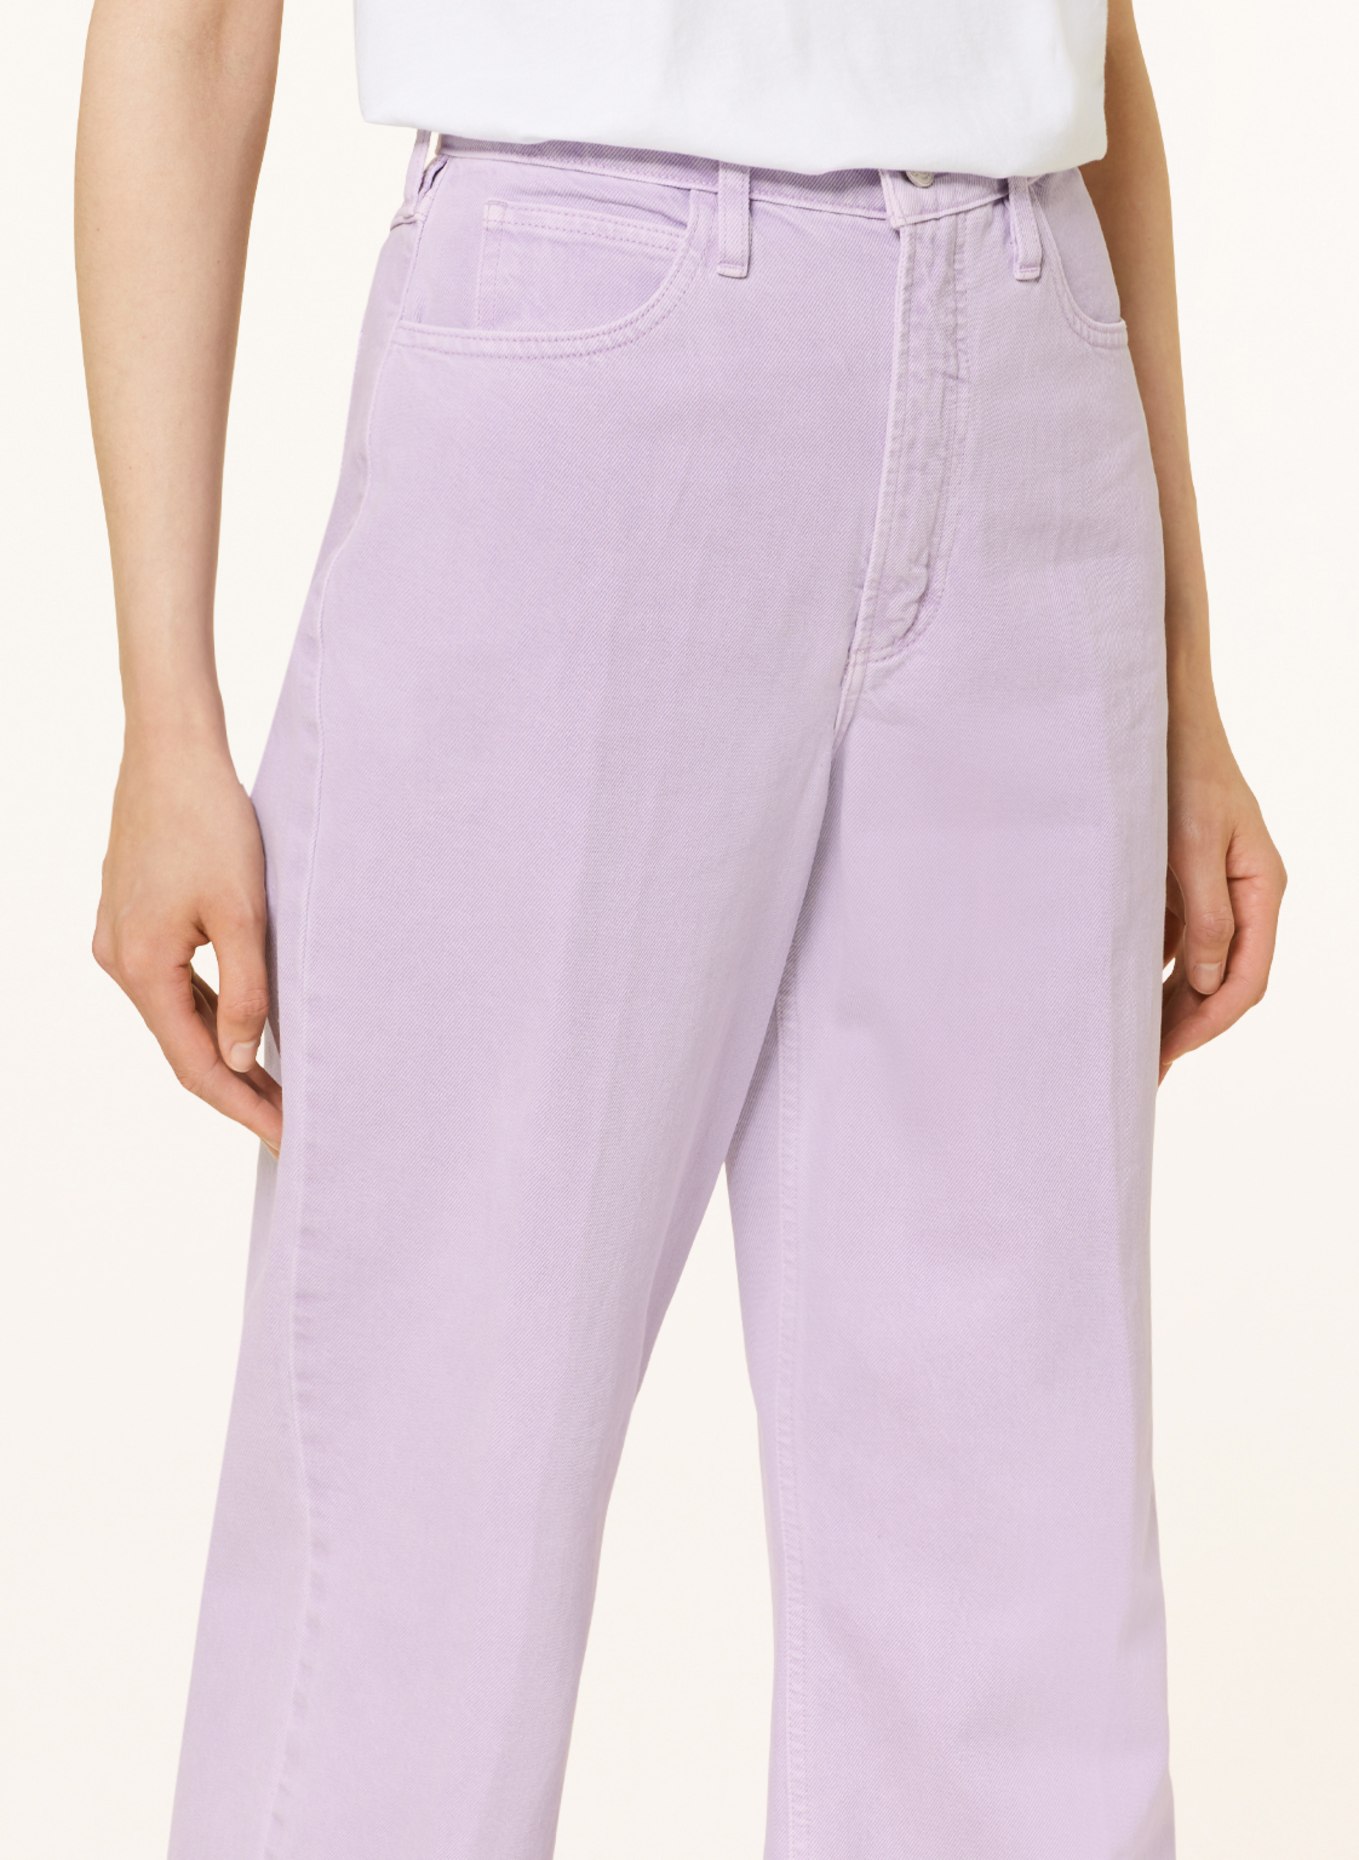 FRAME Jeans LE HIGH 'N' TIGHT, Farbe: WALI WASHED LILAC (Bild 5)